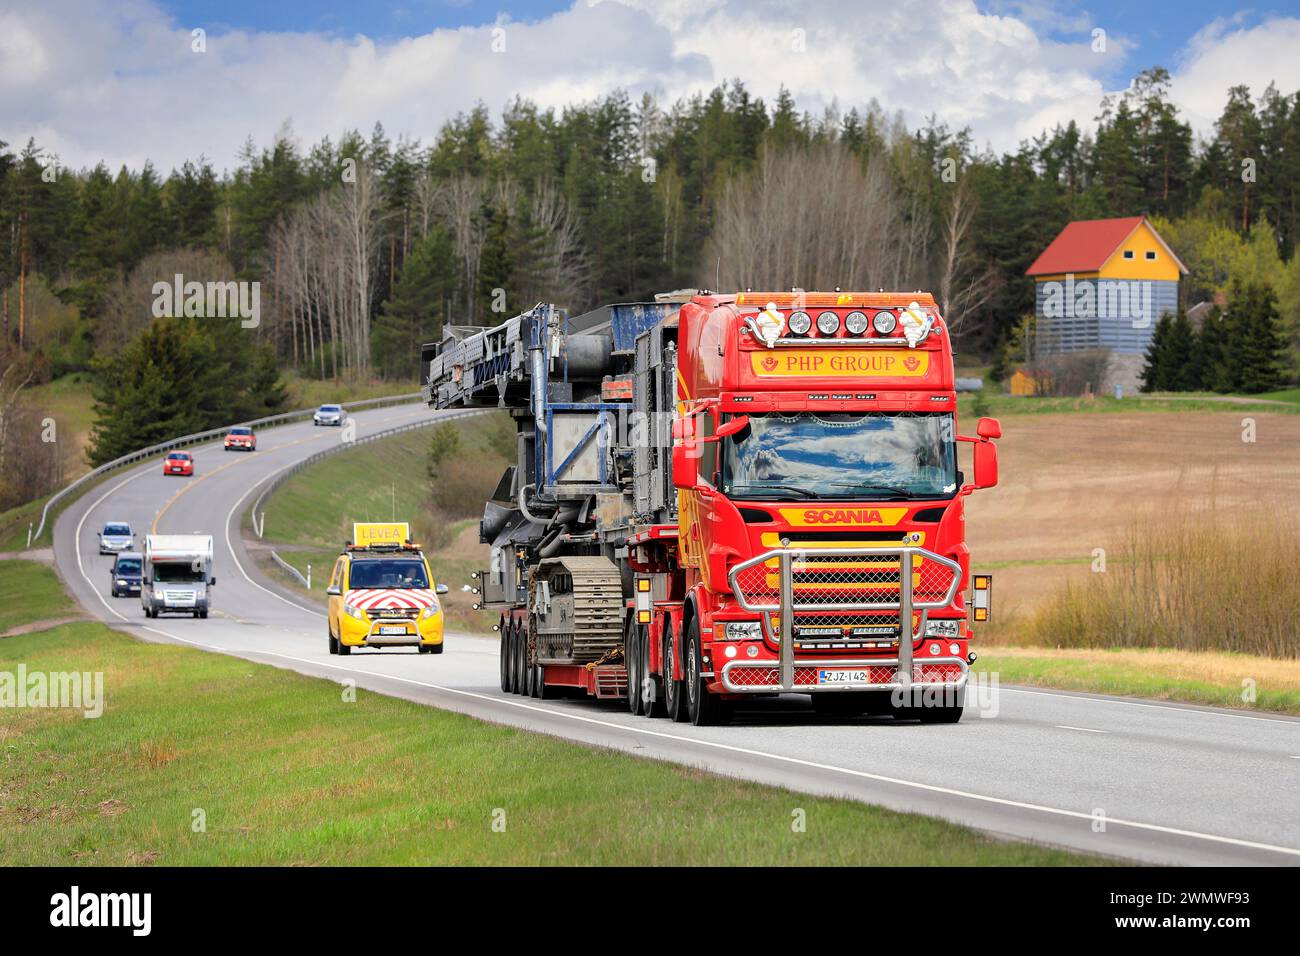 Scania truck PHP Group Oy hauls Volvo Penta powered crushing equipment as oversize load, assisted by escort vehicle. Salo, Finland. May 13, 2022. Stock Photo